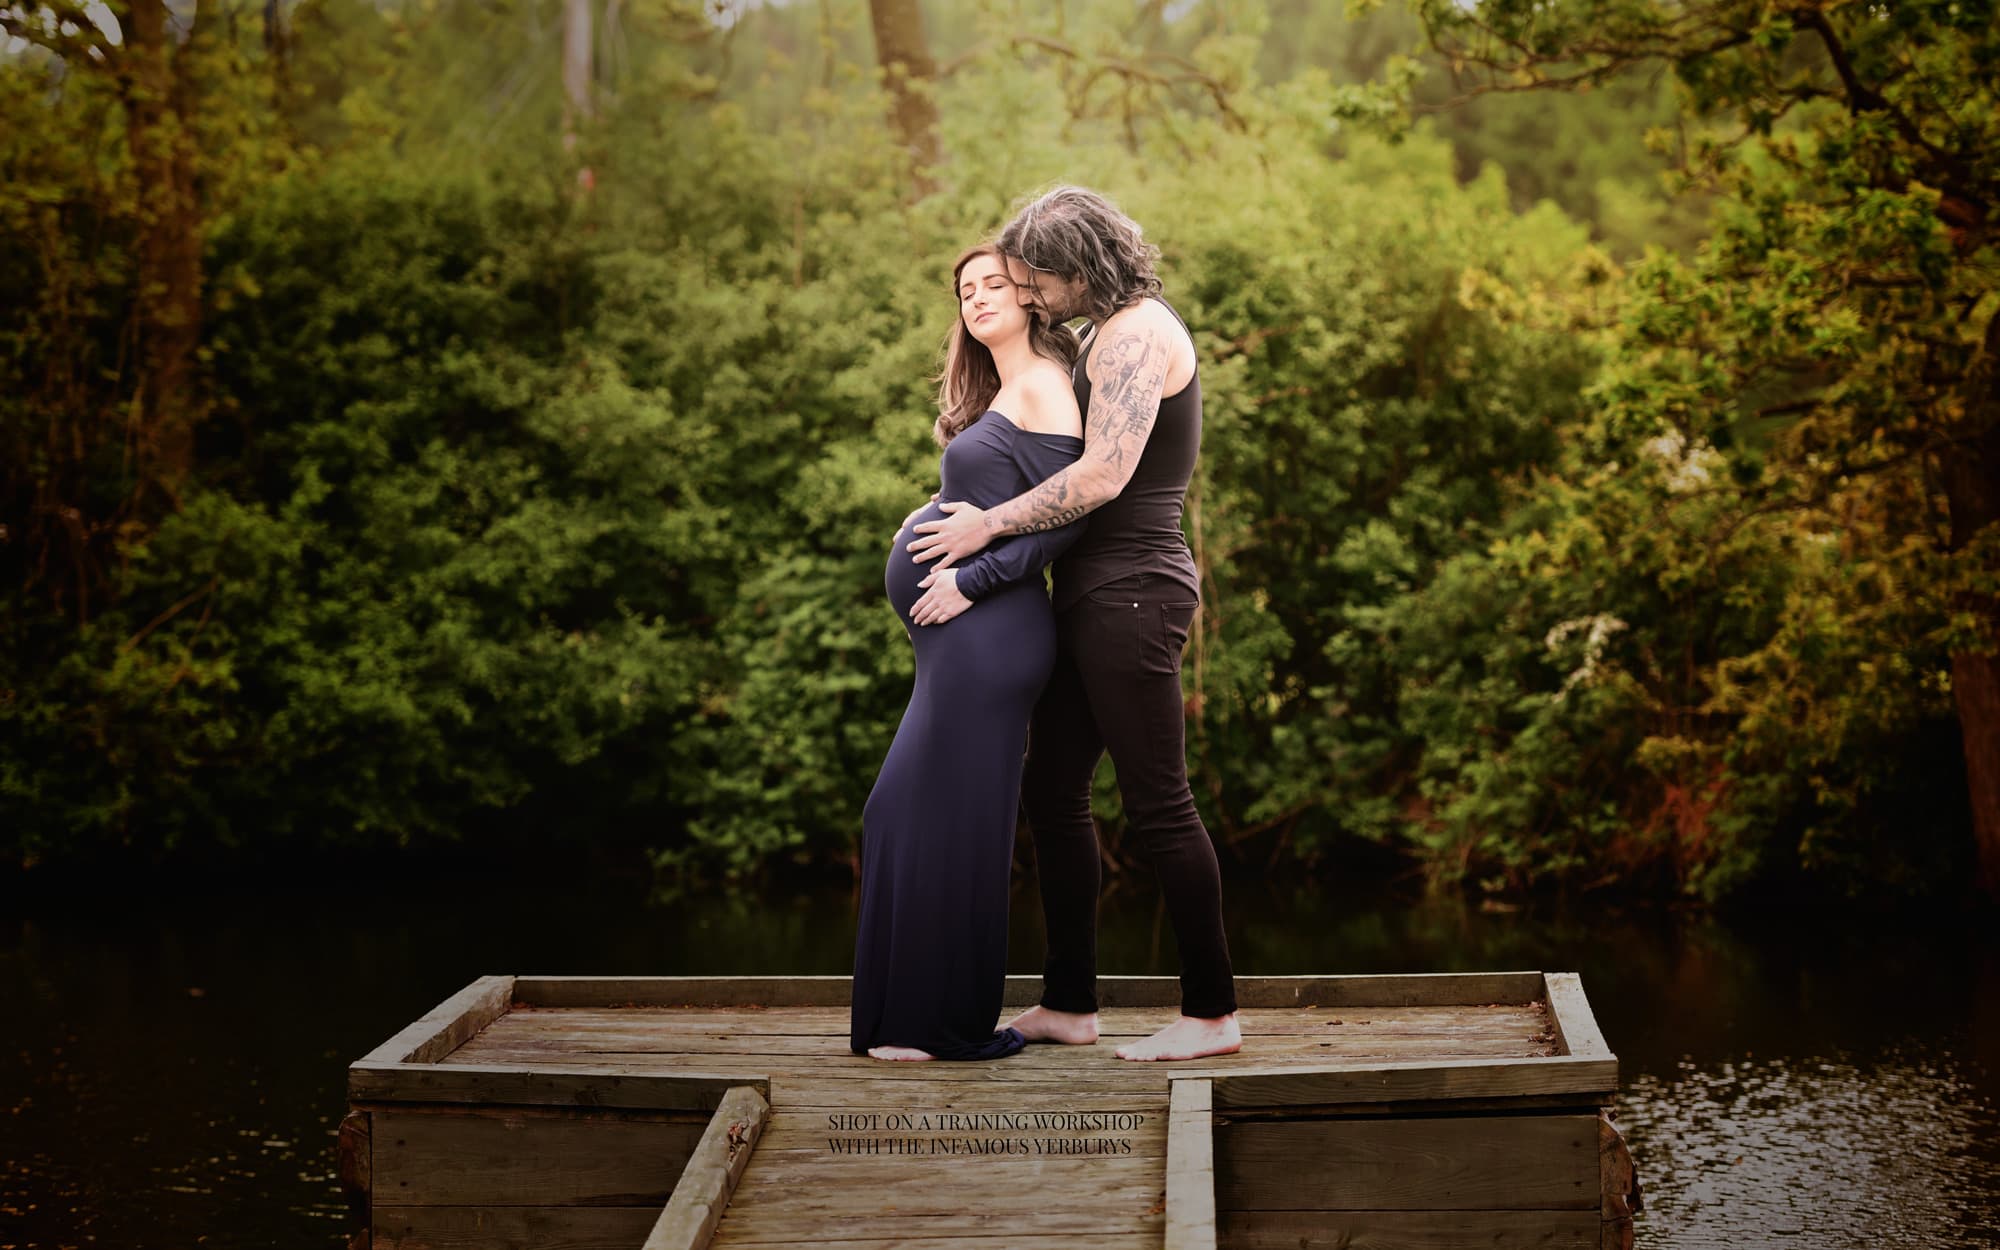 Nic Bisseker Photography Maternity photographer East Grinstead